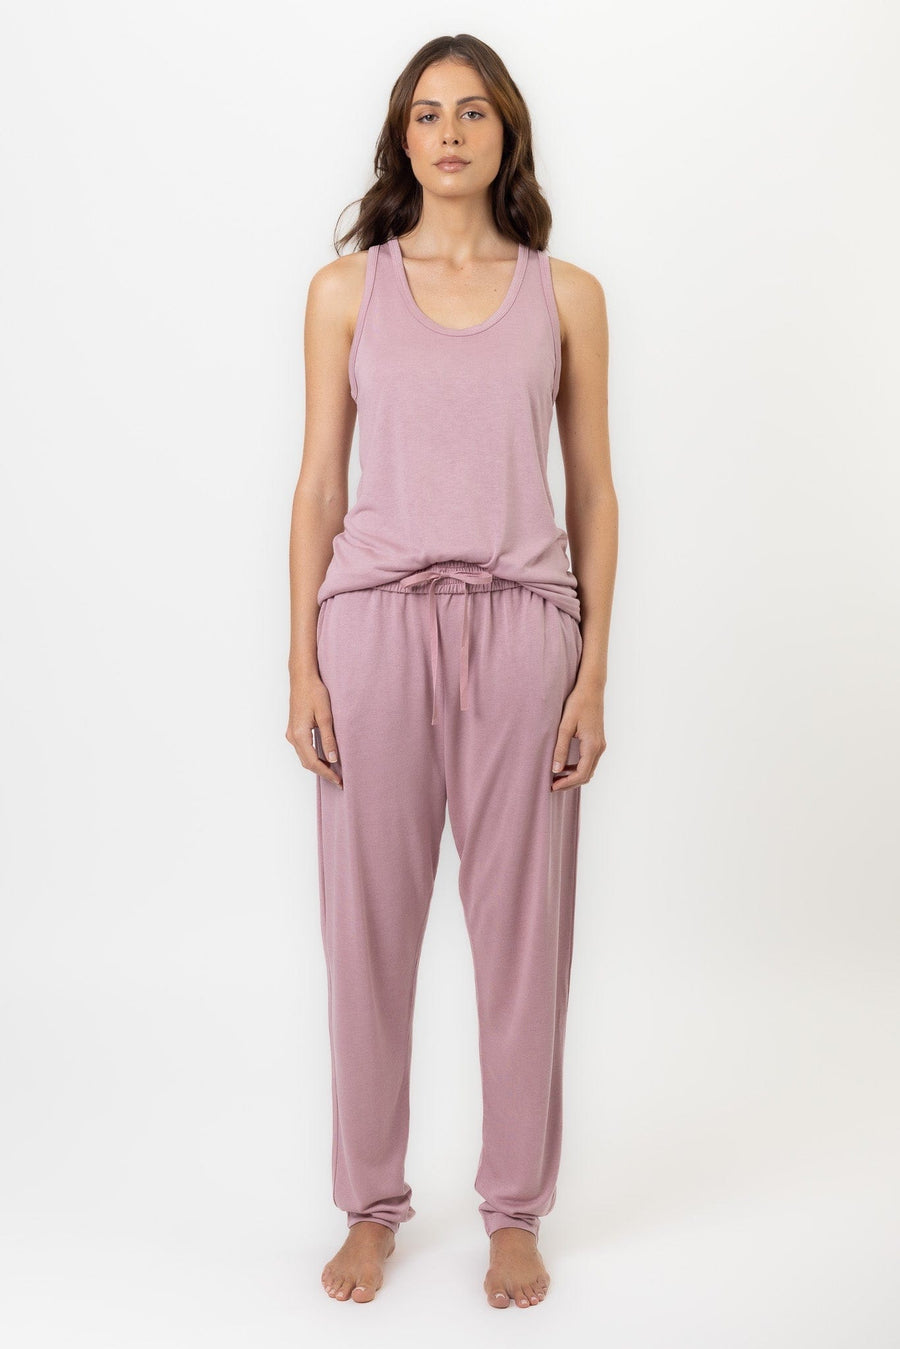 Twilight Top | Blush Pink Twighlight Top Tops Pajamas Australia Online | Reverie the Label  TOPS Twilight Top